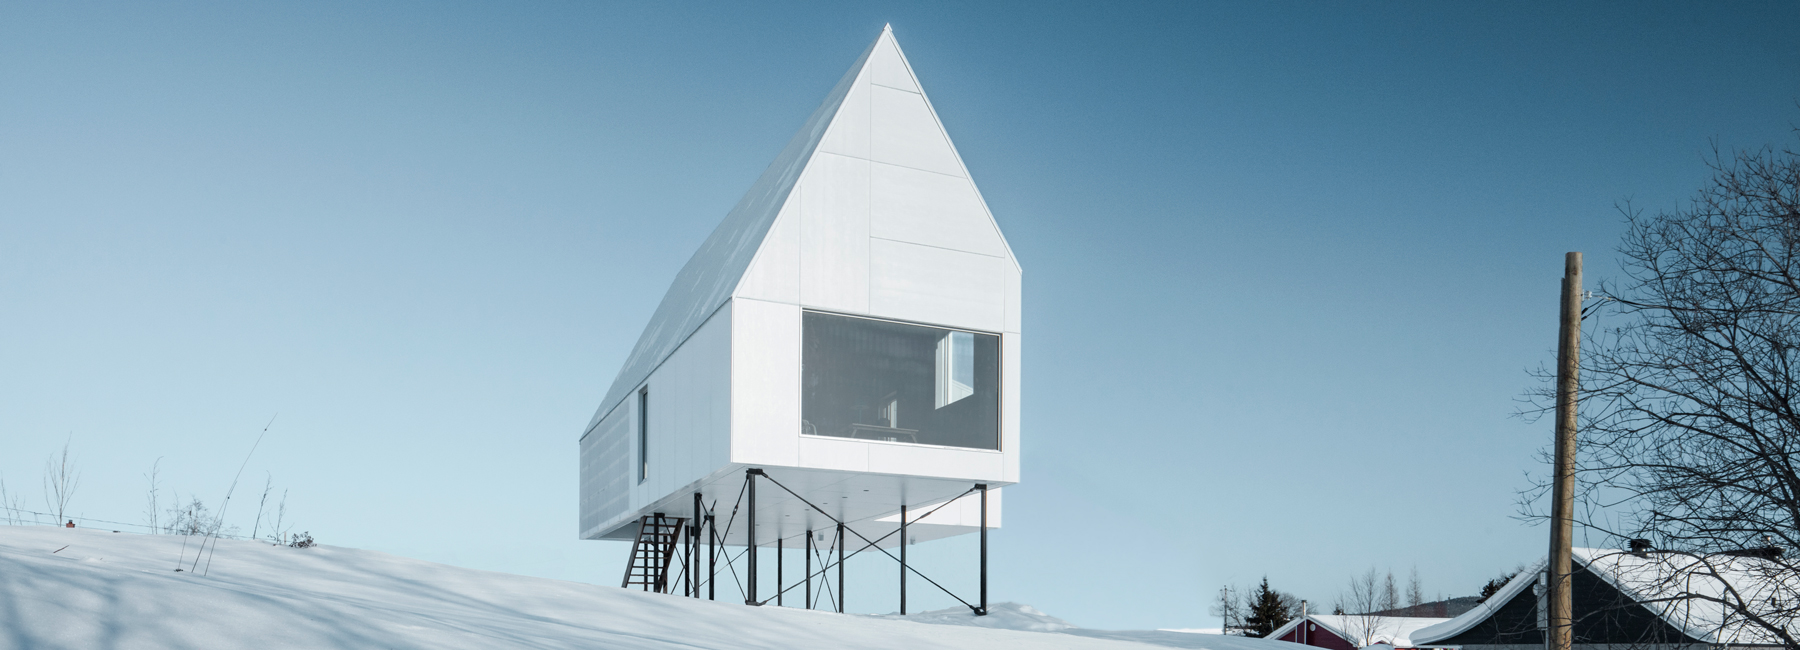 delordinaire elevates high house above snow-covered landscape in quebec